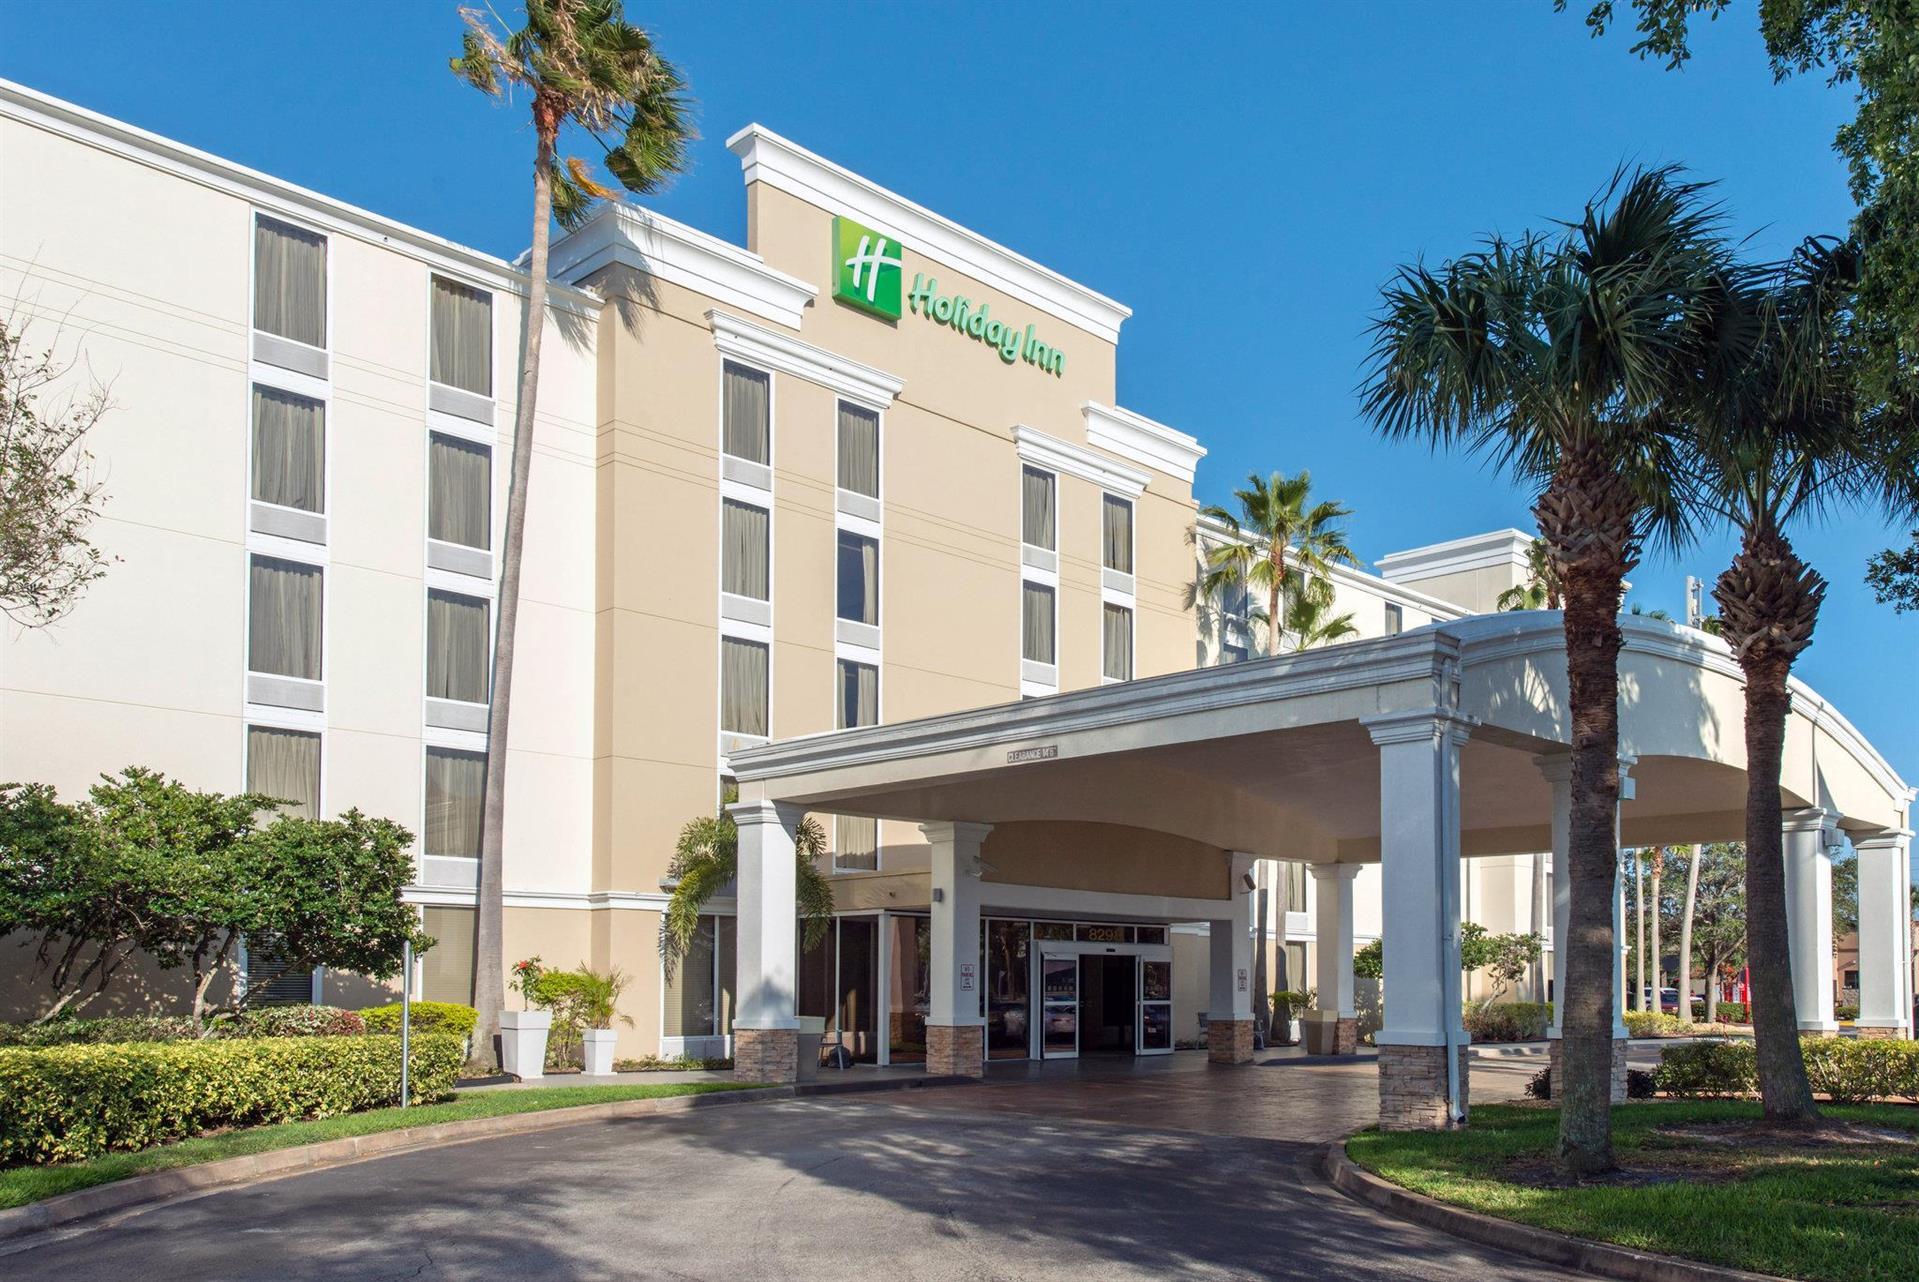 Holiday Inn Melbourne-Viera Conference Ctr in Melbourne, FL